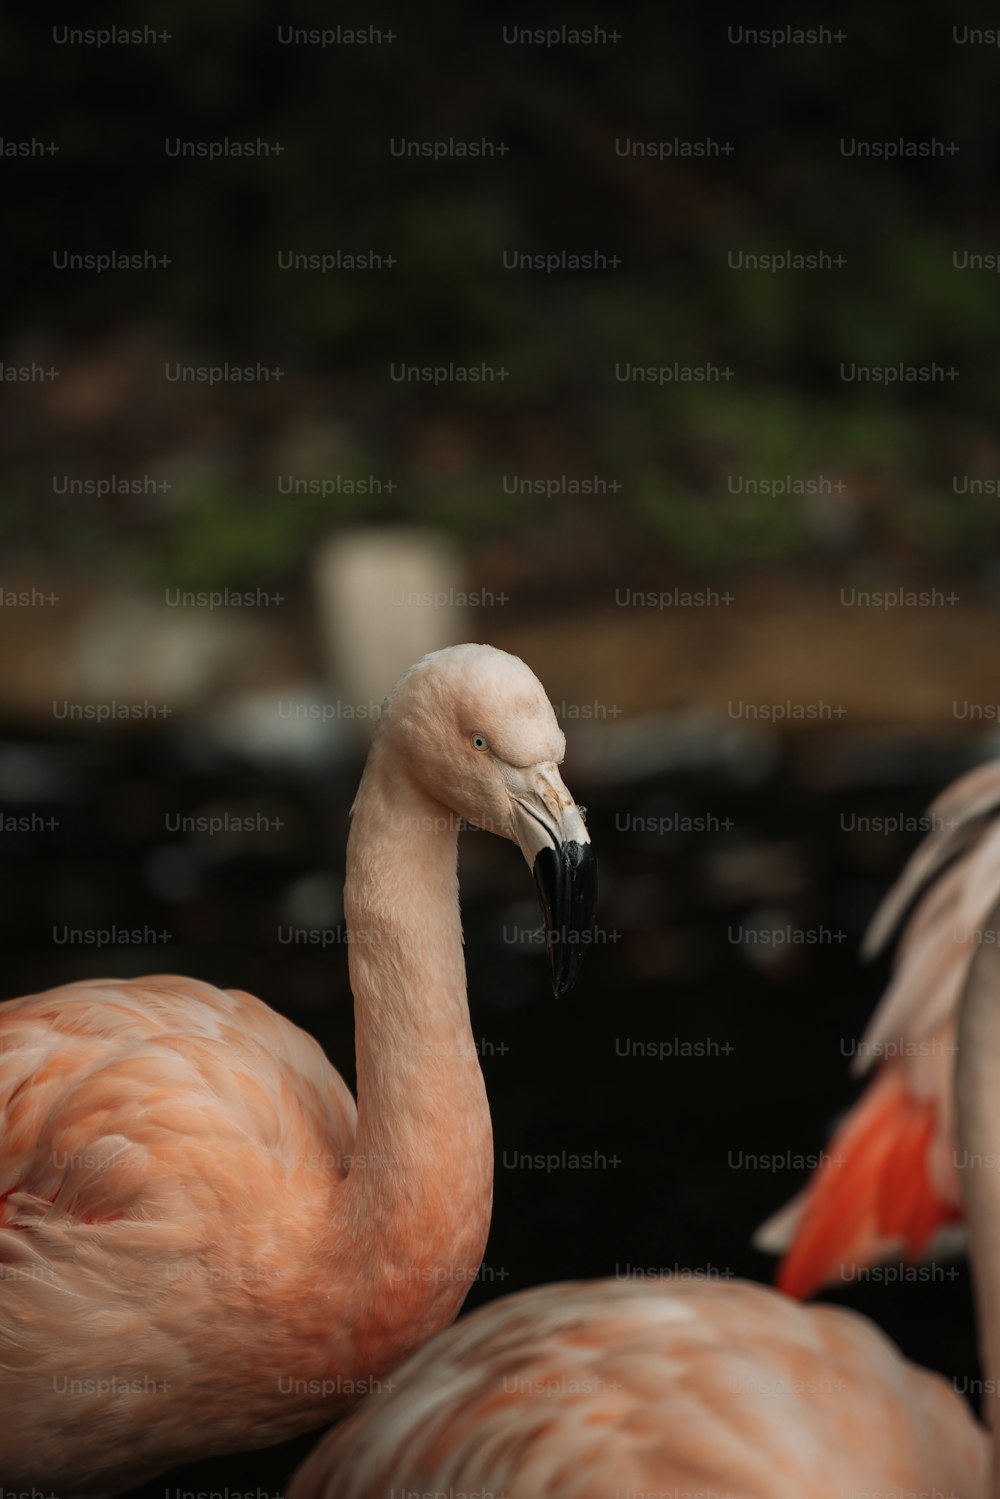 a couple of flamingos standing next to each other